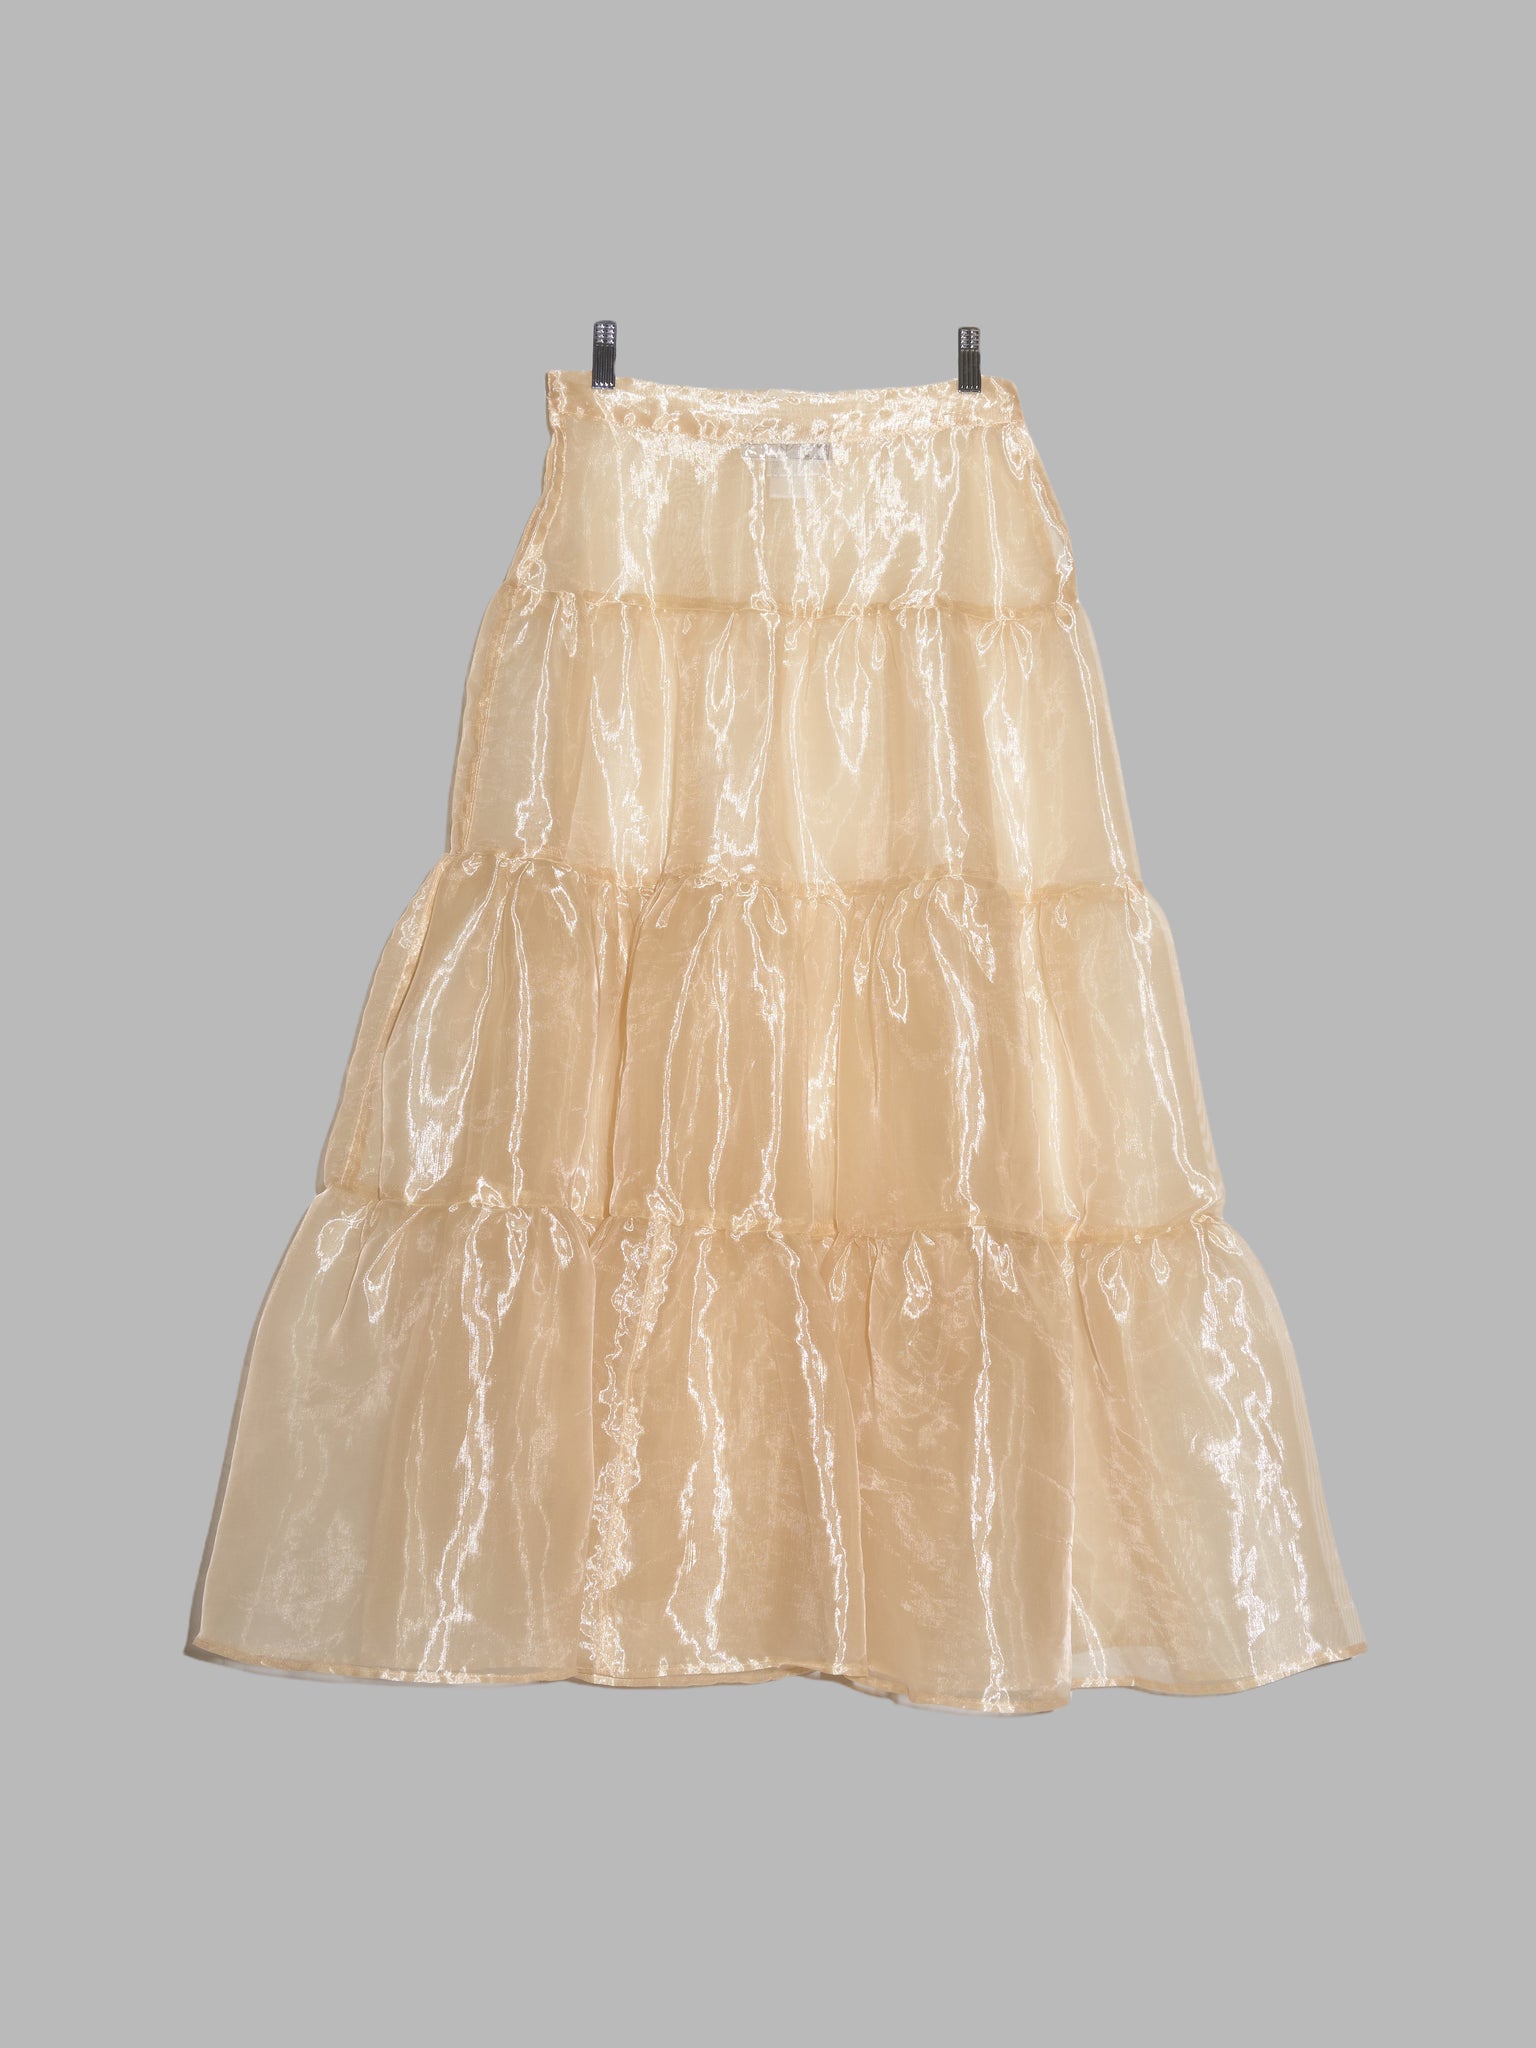 Dexter Wong 1990s gold polyester organza tiered see-through maxi skirt - S